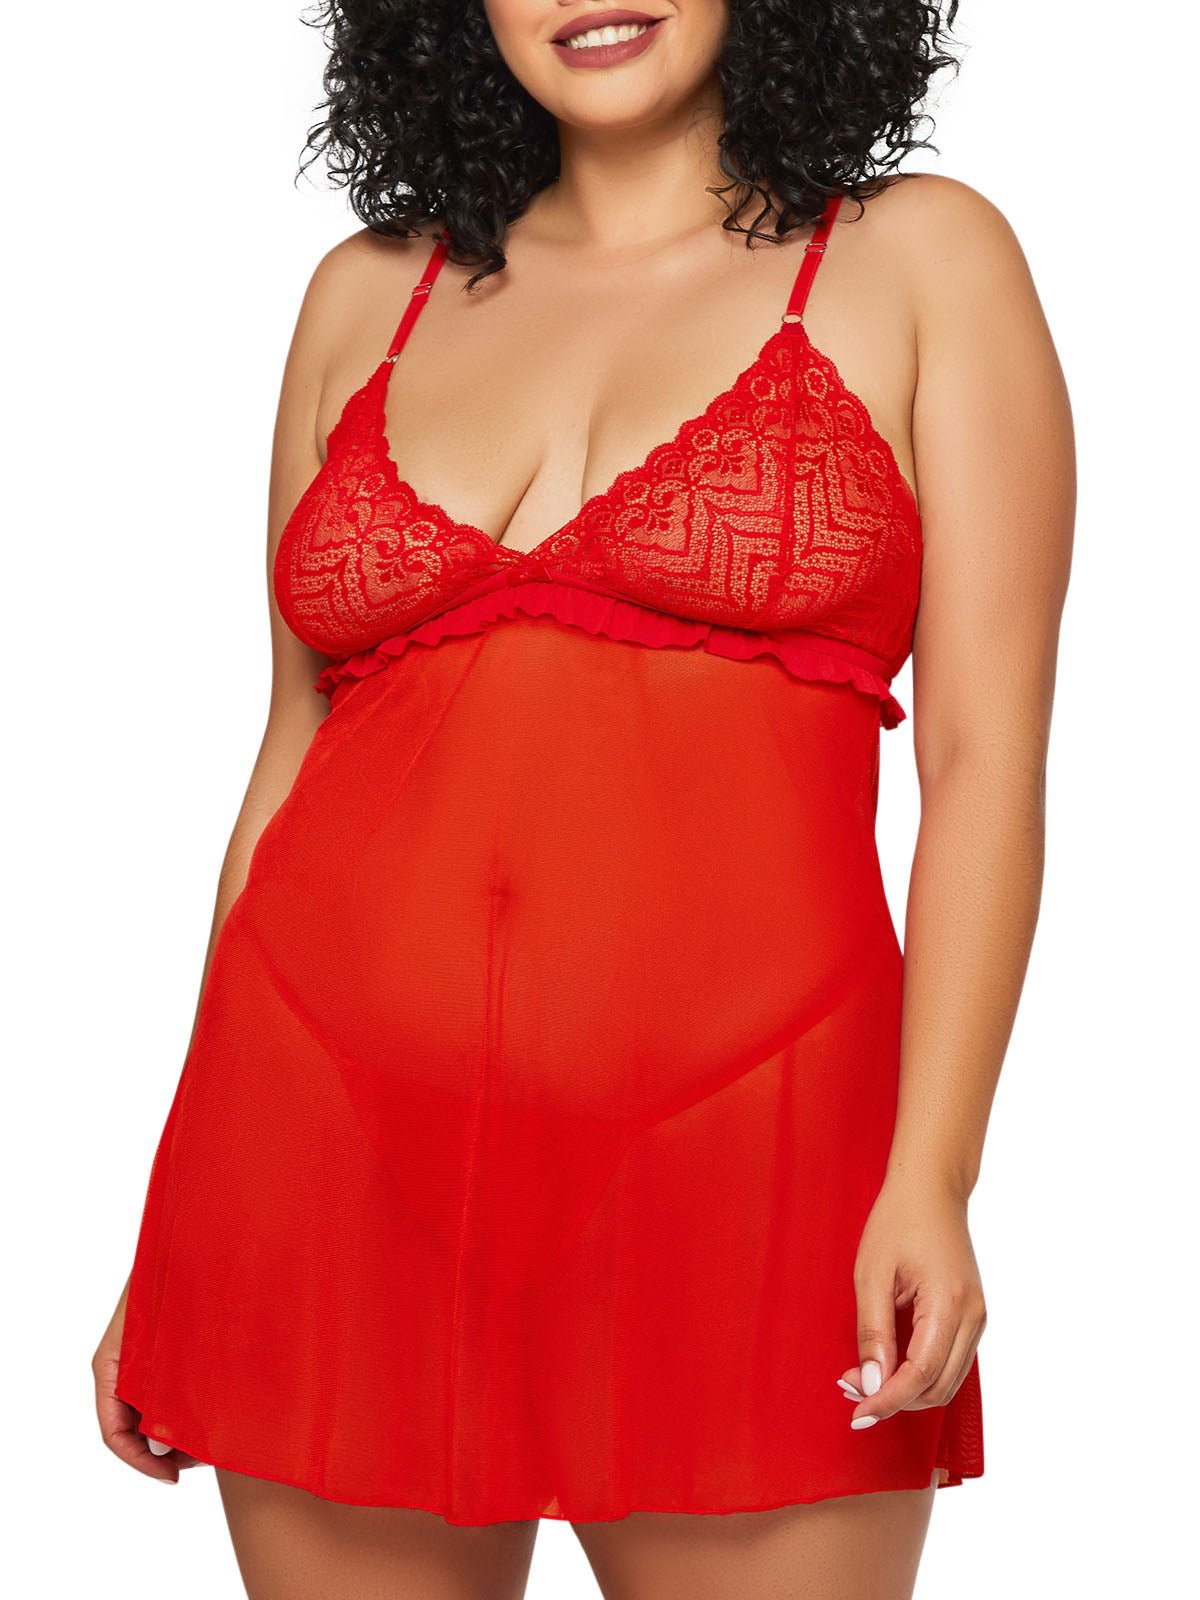 iCollection Daisy Plus Size Babydoll